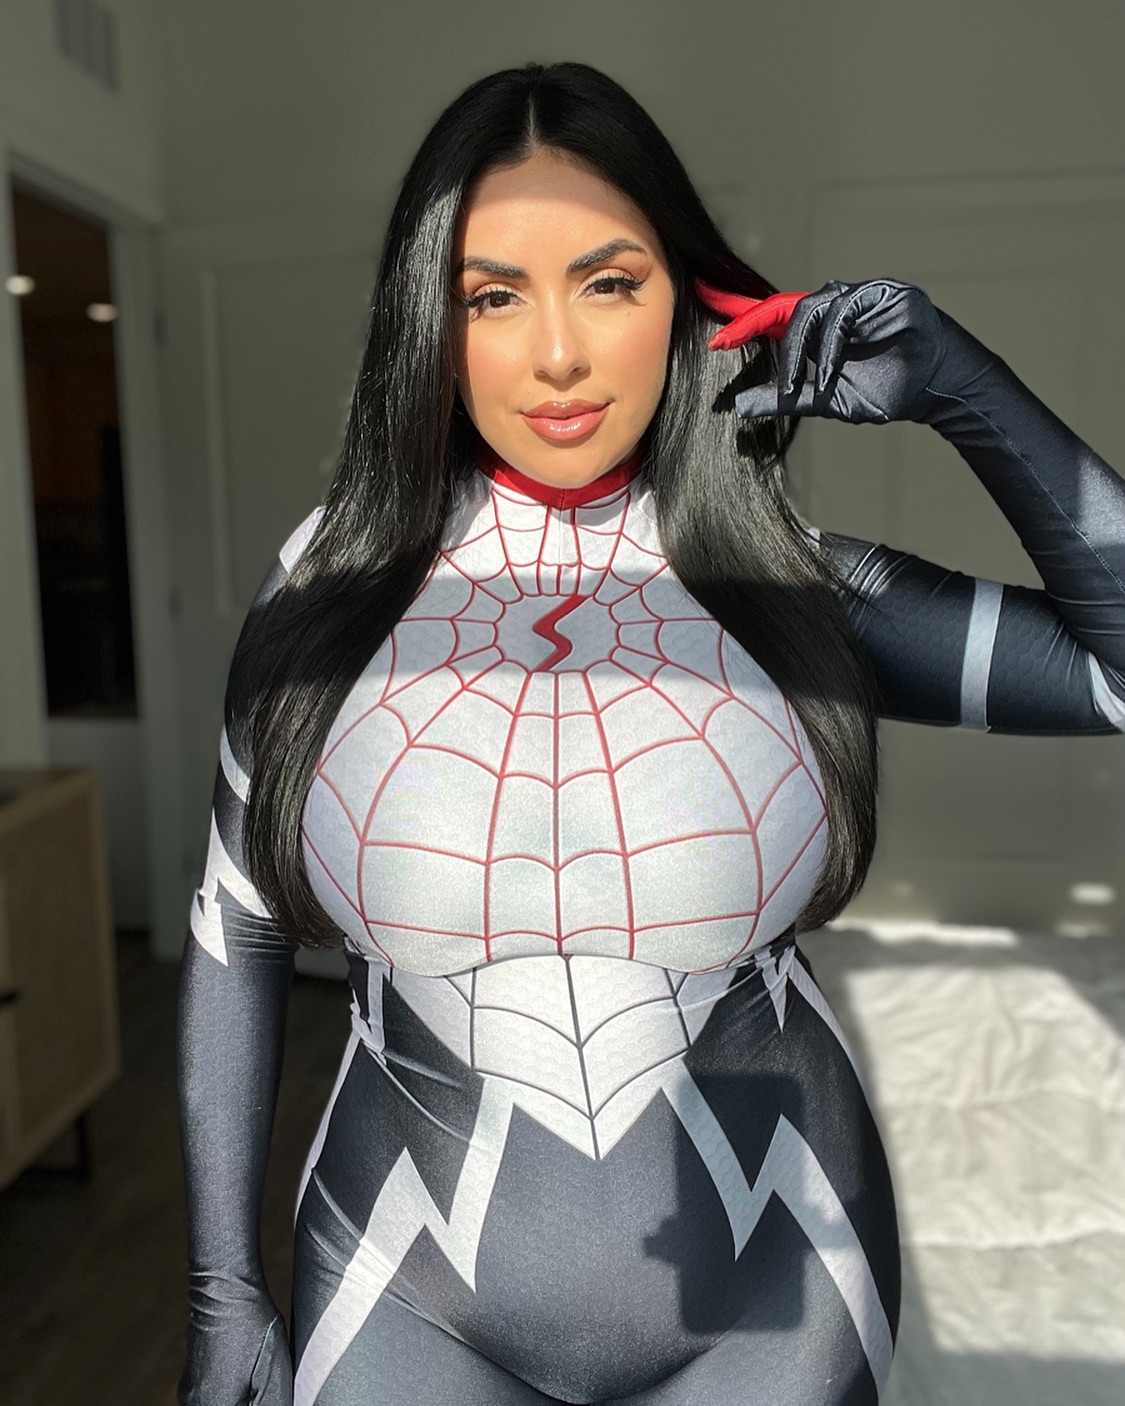 🕷️🕸️ Silk 🕸️🕷️
.
.
.
A little casual Silk unmasked cosplay - It’s been a minute since I’ve been in cosplay so I decided to throw on one of my favs! It feels good to be back in it ❤️

#spiderman #spidermancosplay #silk #silkcosplay #cindymoon #marvel #marvelcosplay #marvelcomics #marvelcosplayer #cosplaygirl #cosplaygirls #femalecosplayer